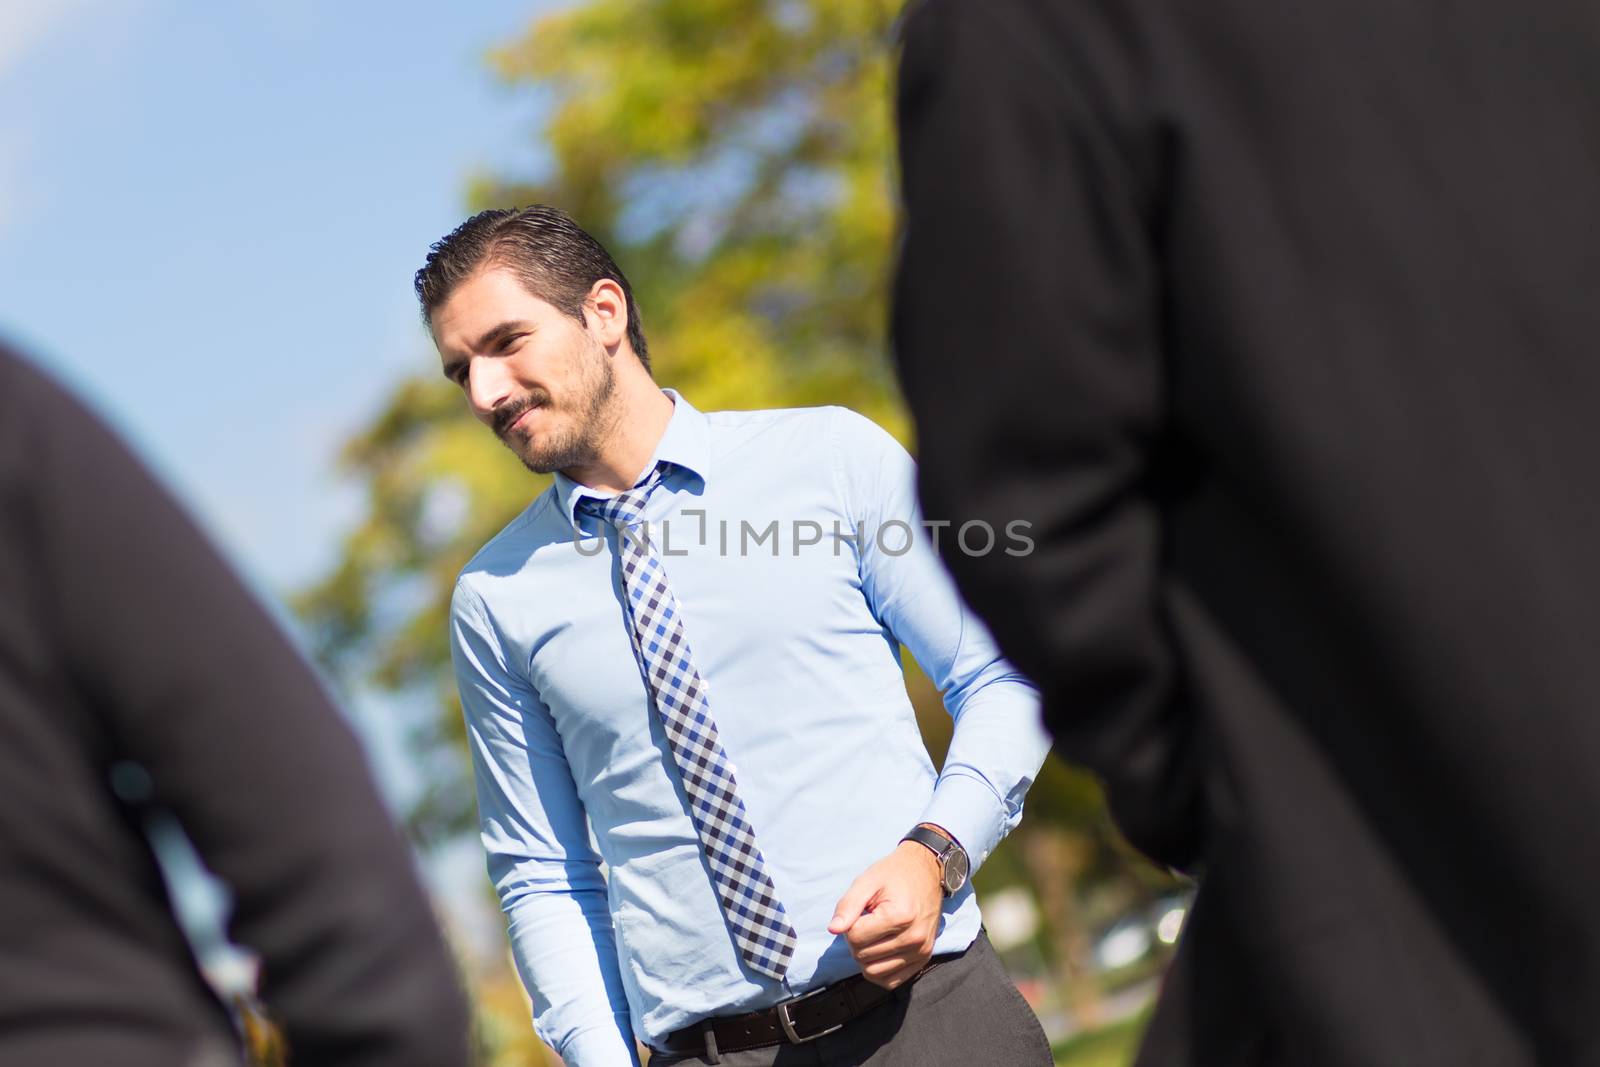 Attractive young businessman with a friendly smile having informal out of office meeting on a suny day.